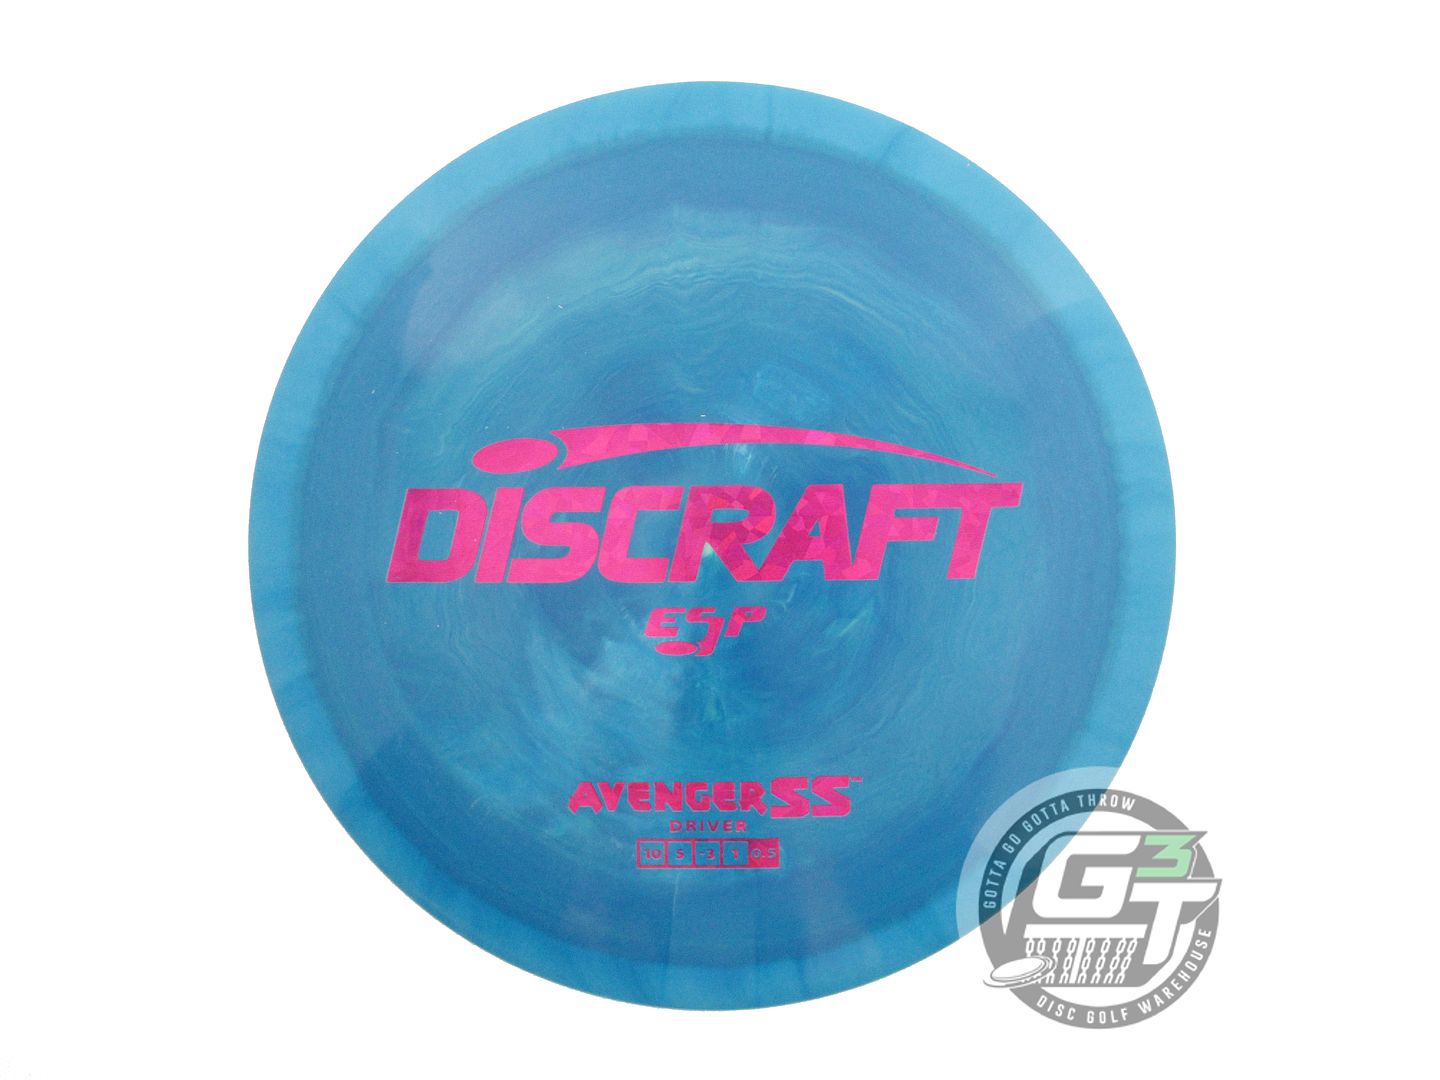 Discraft ESP Avenger SS Distance Driver Golf Disc (Individually Listed)